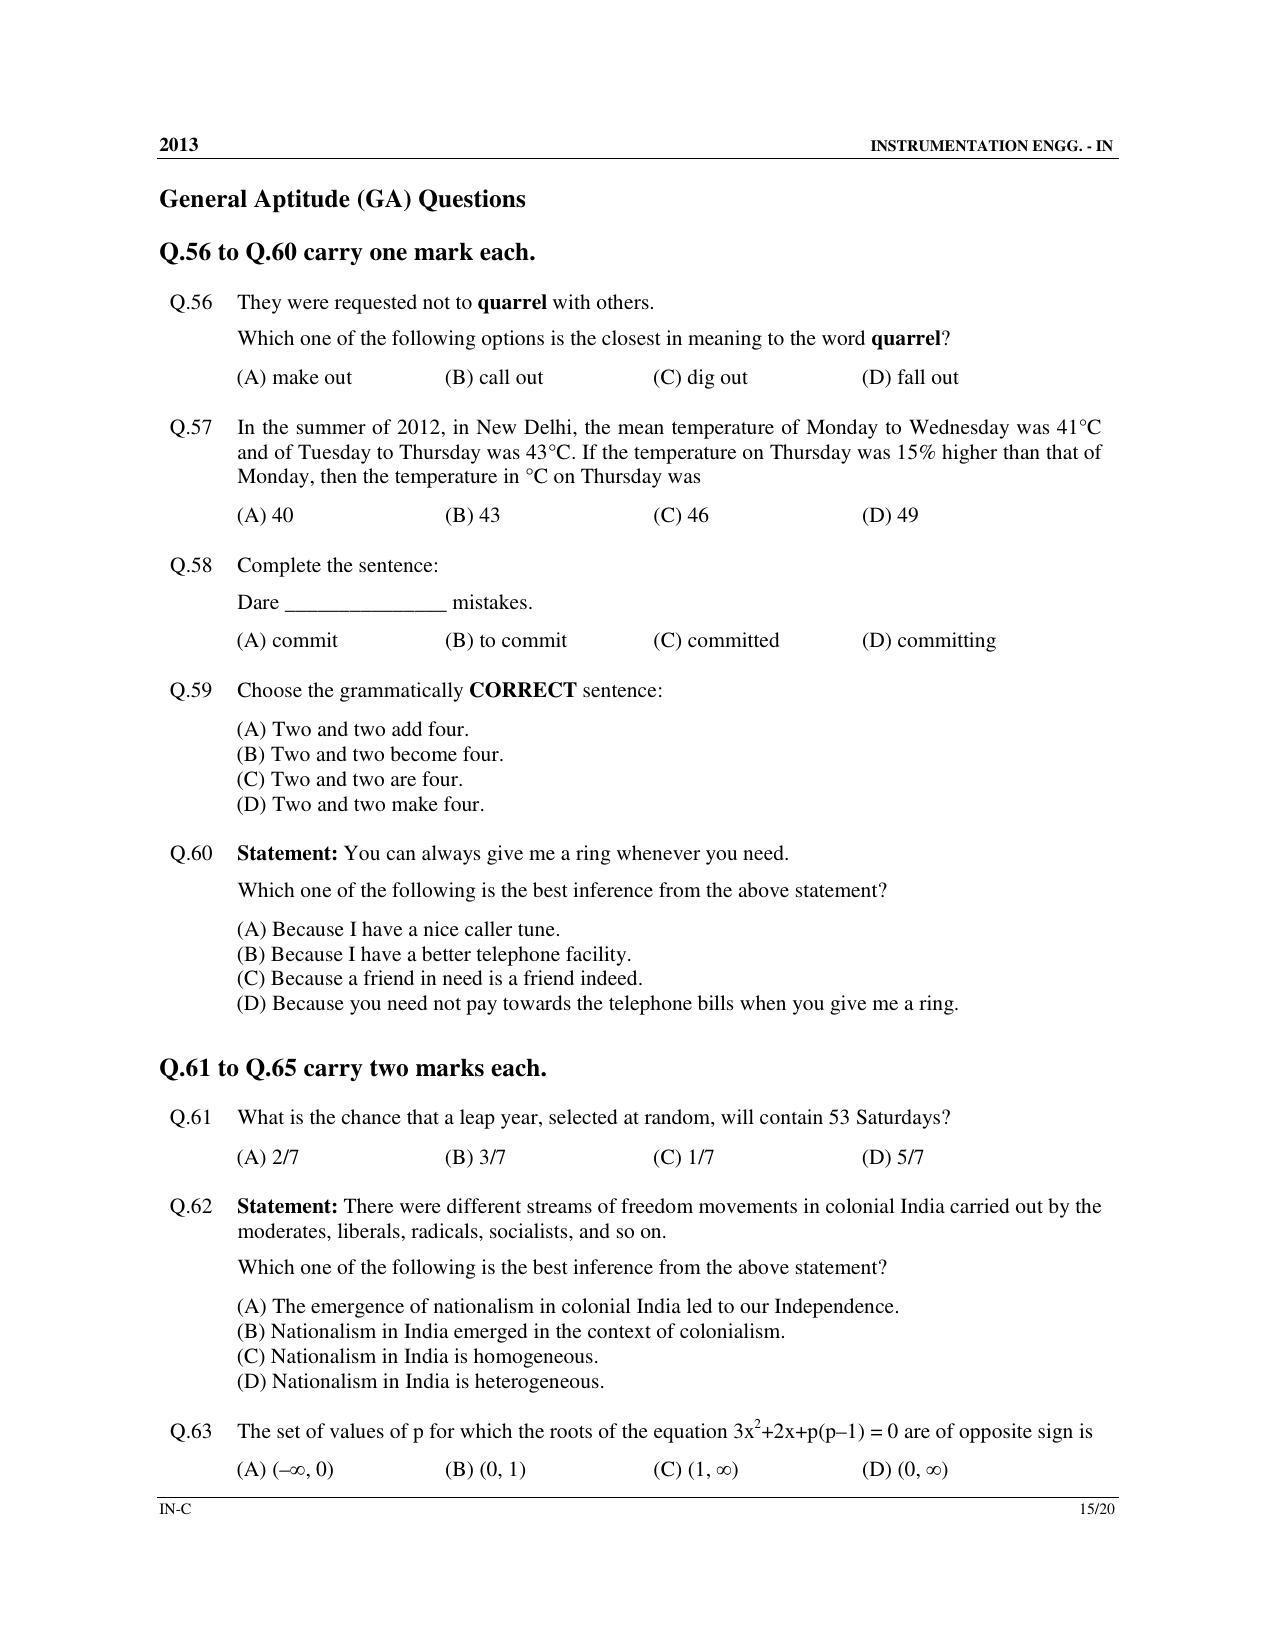 GATE 2013 Instrumentation Engineering (IN) Question Paper with Answer Key - Page 50